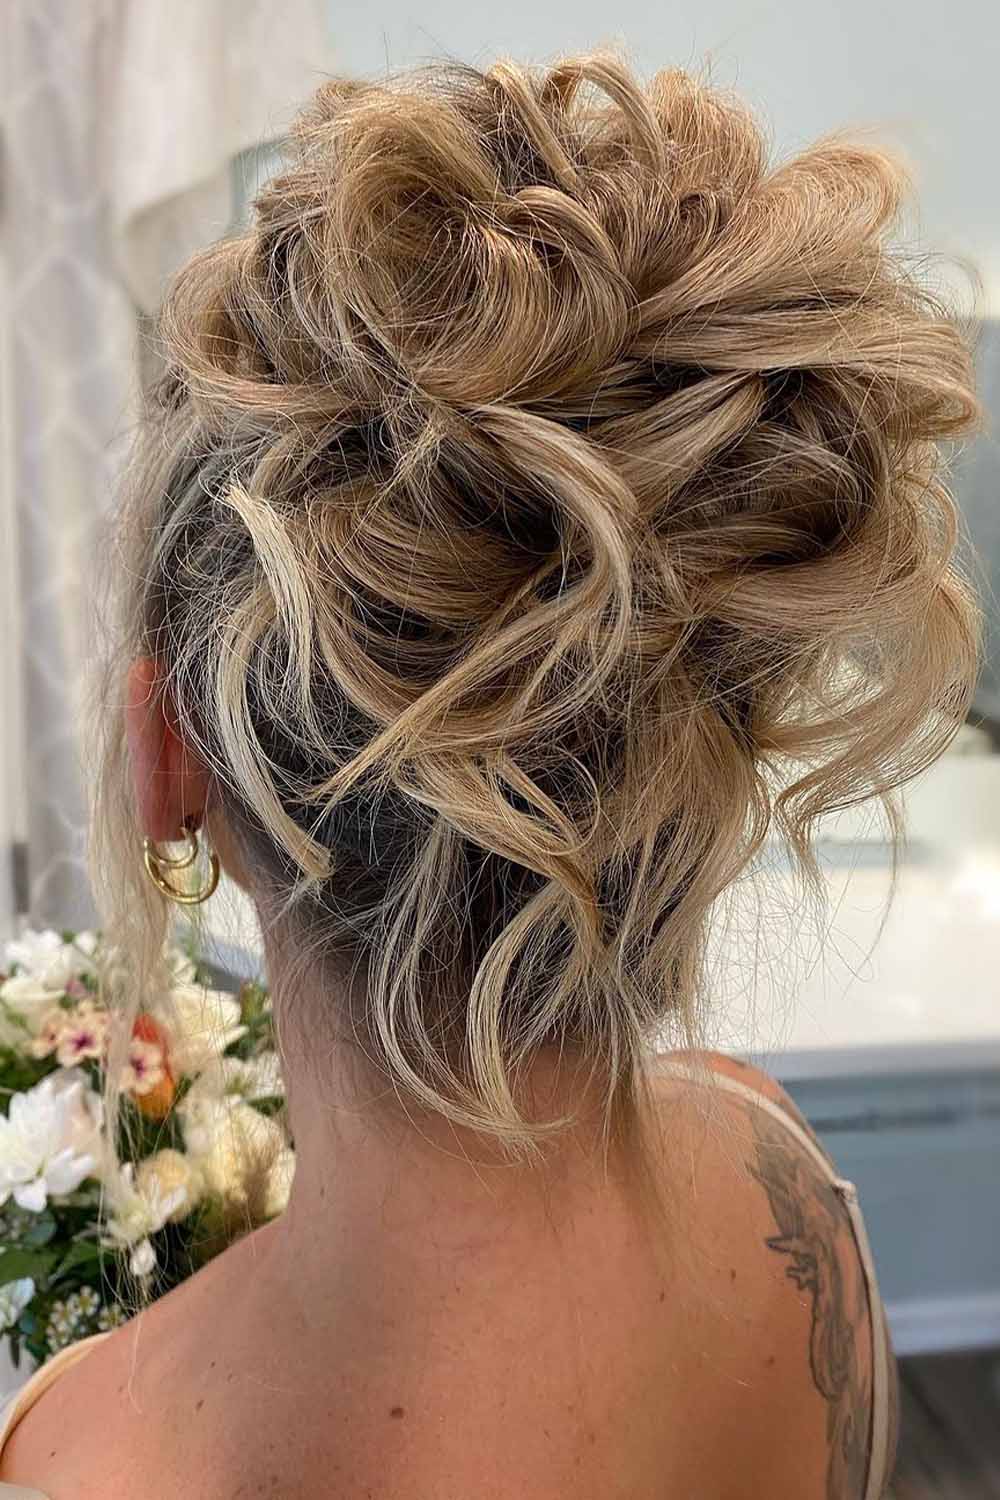 Updo with Blondish Highlights